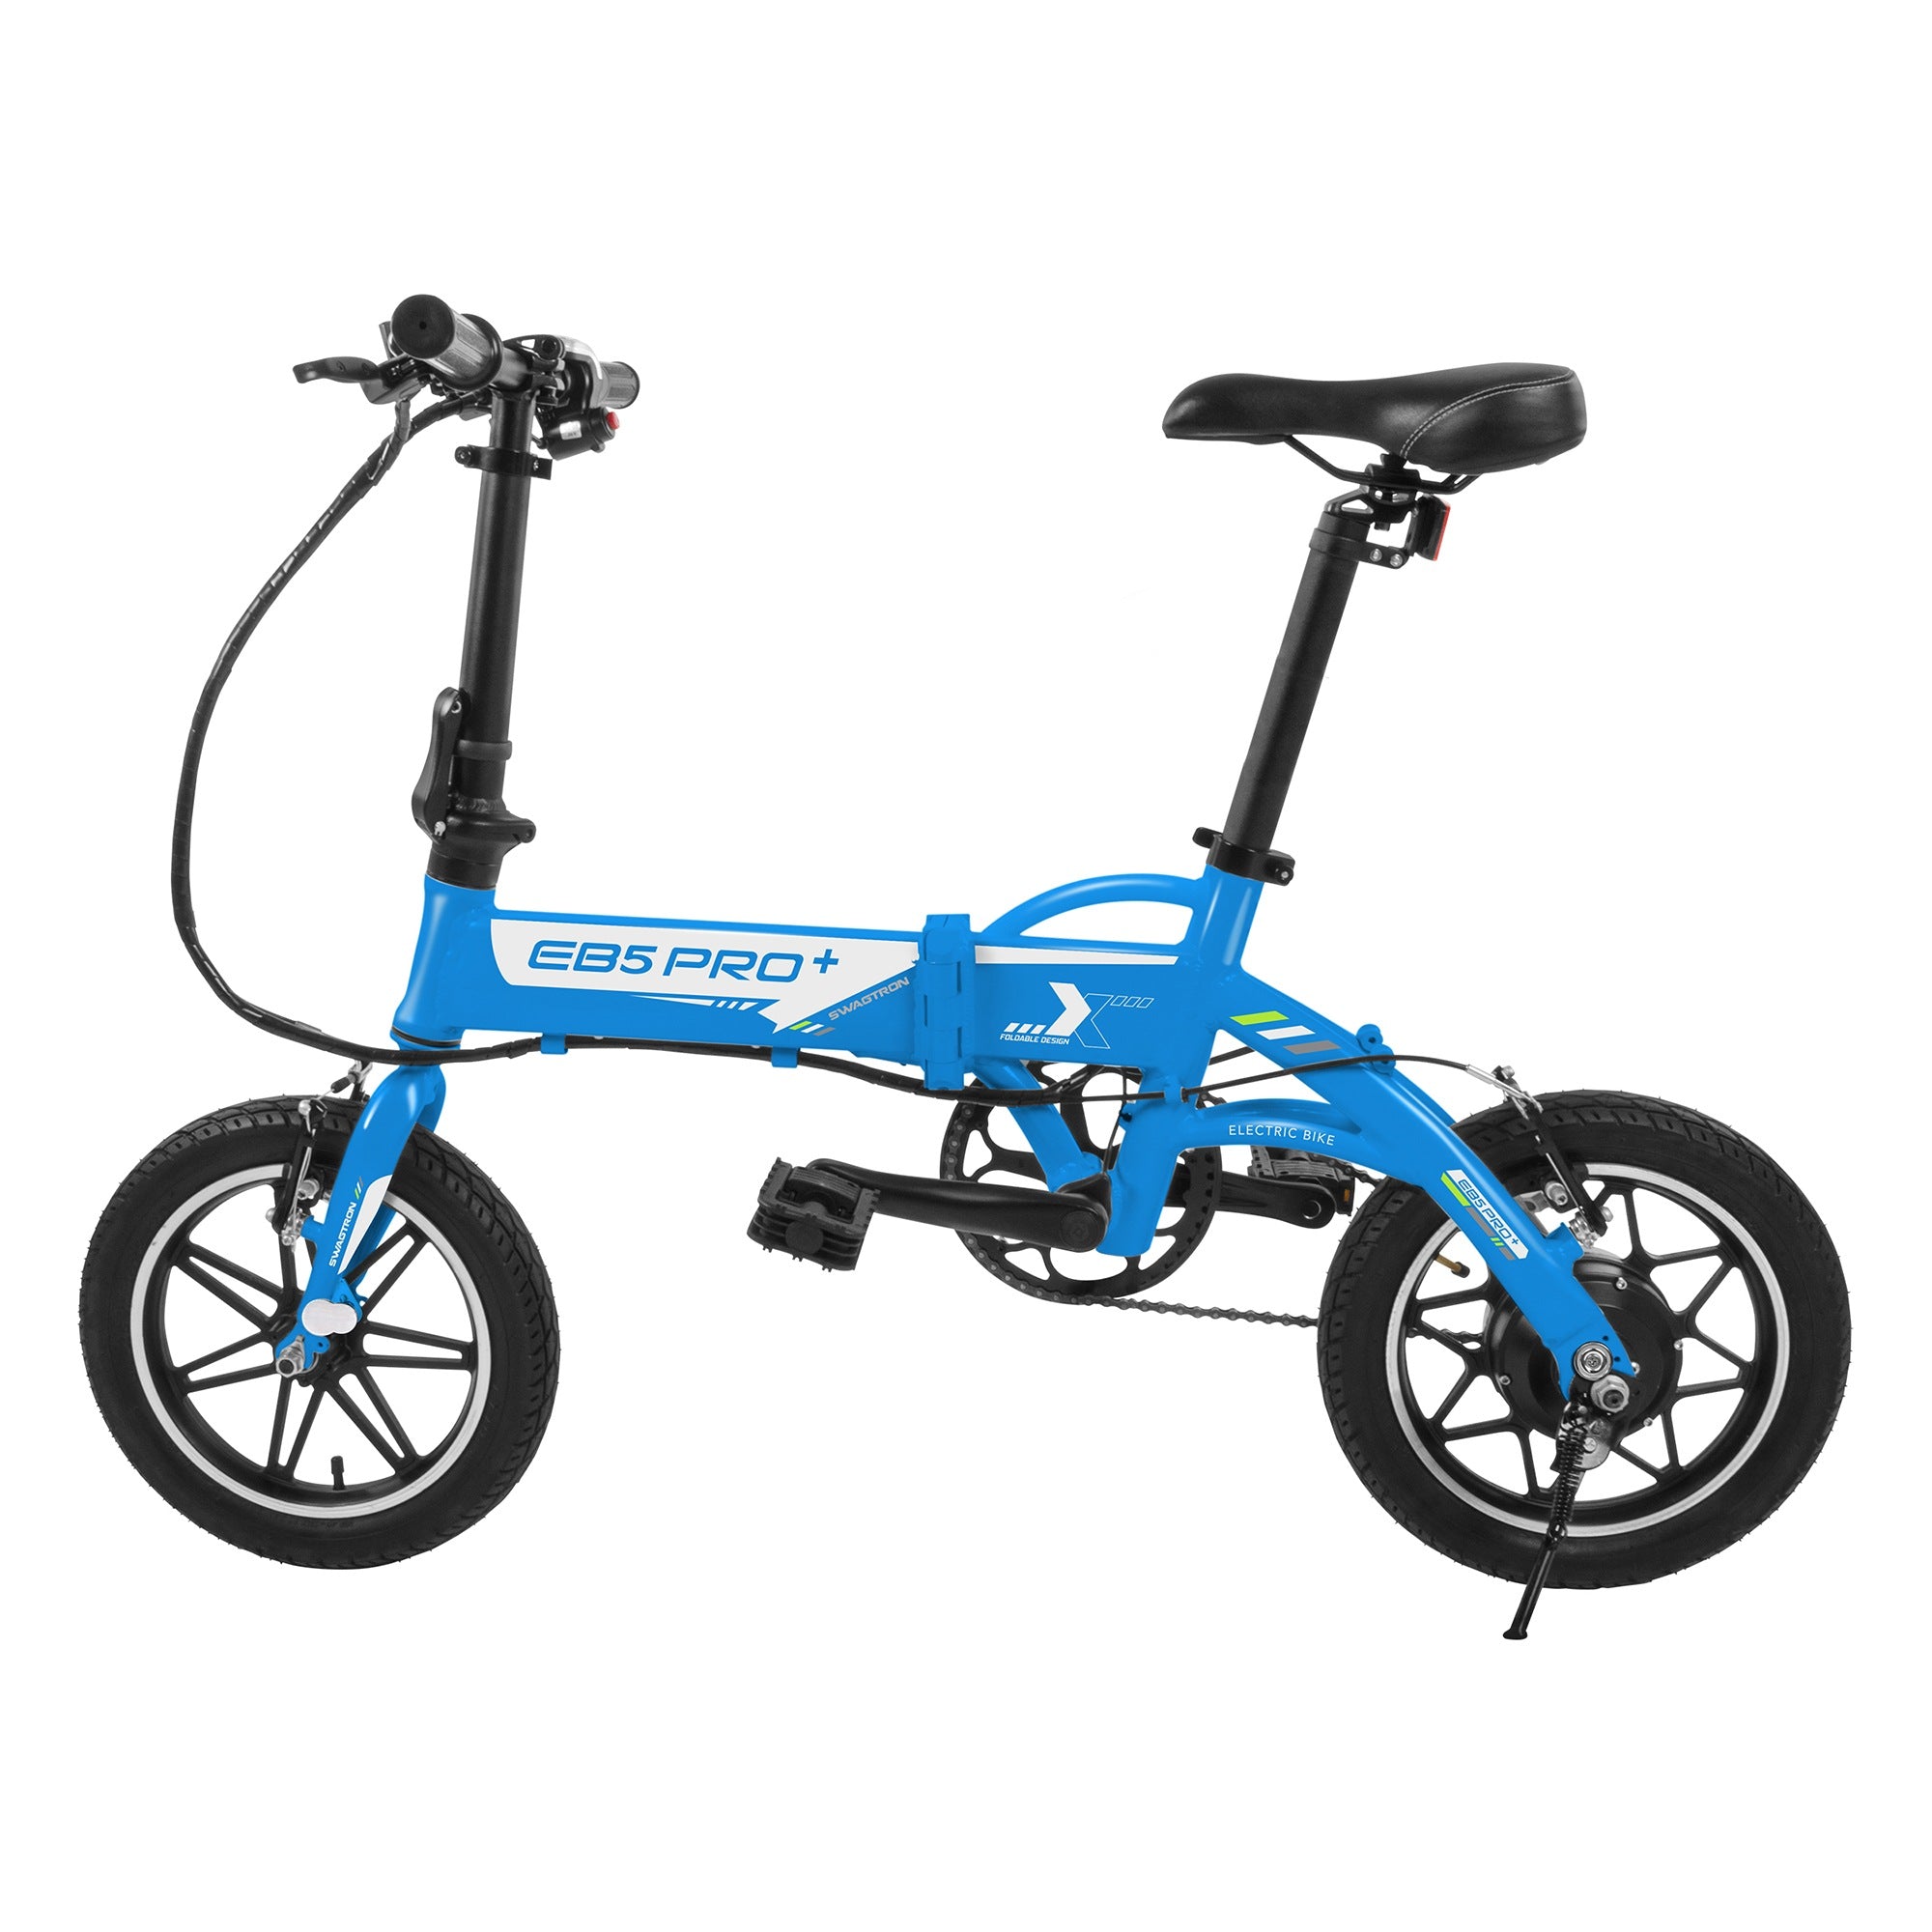 swagcycle eb5